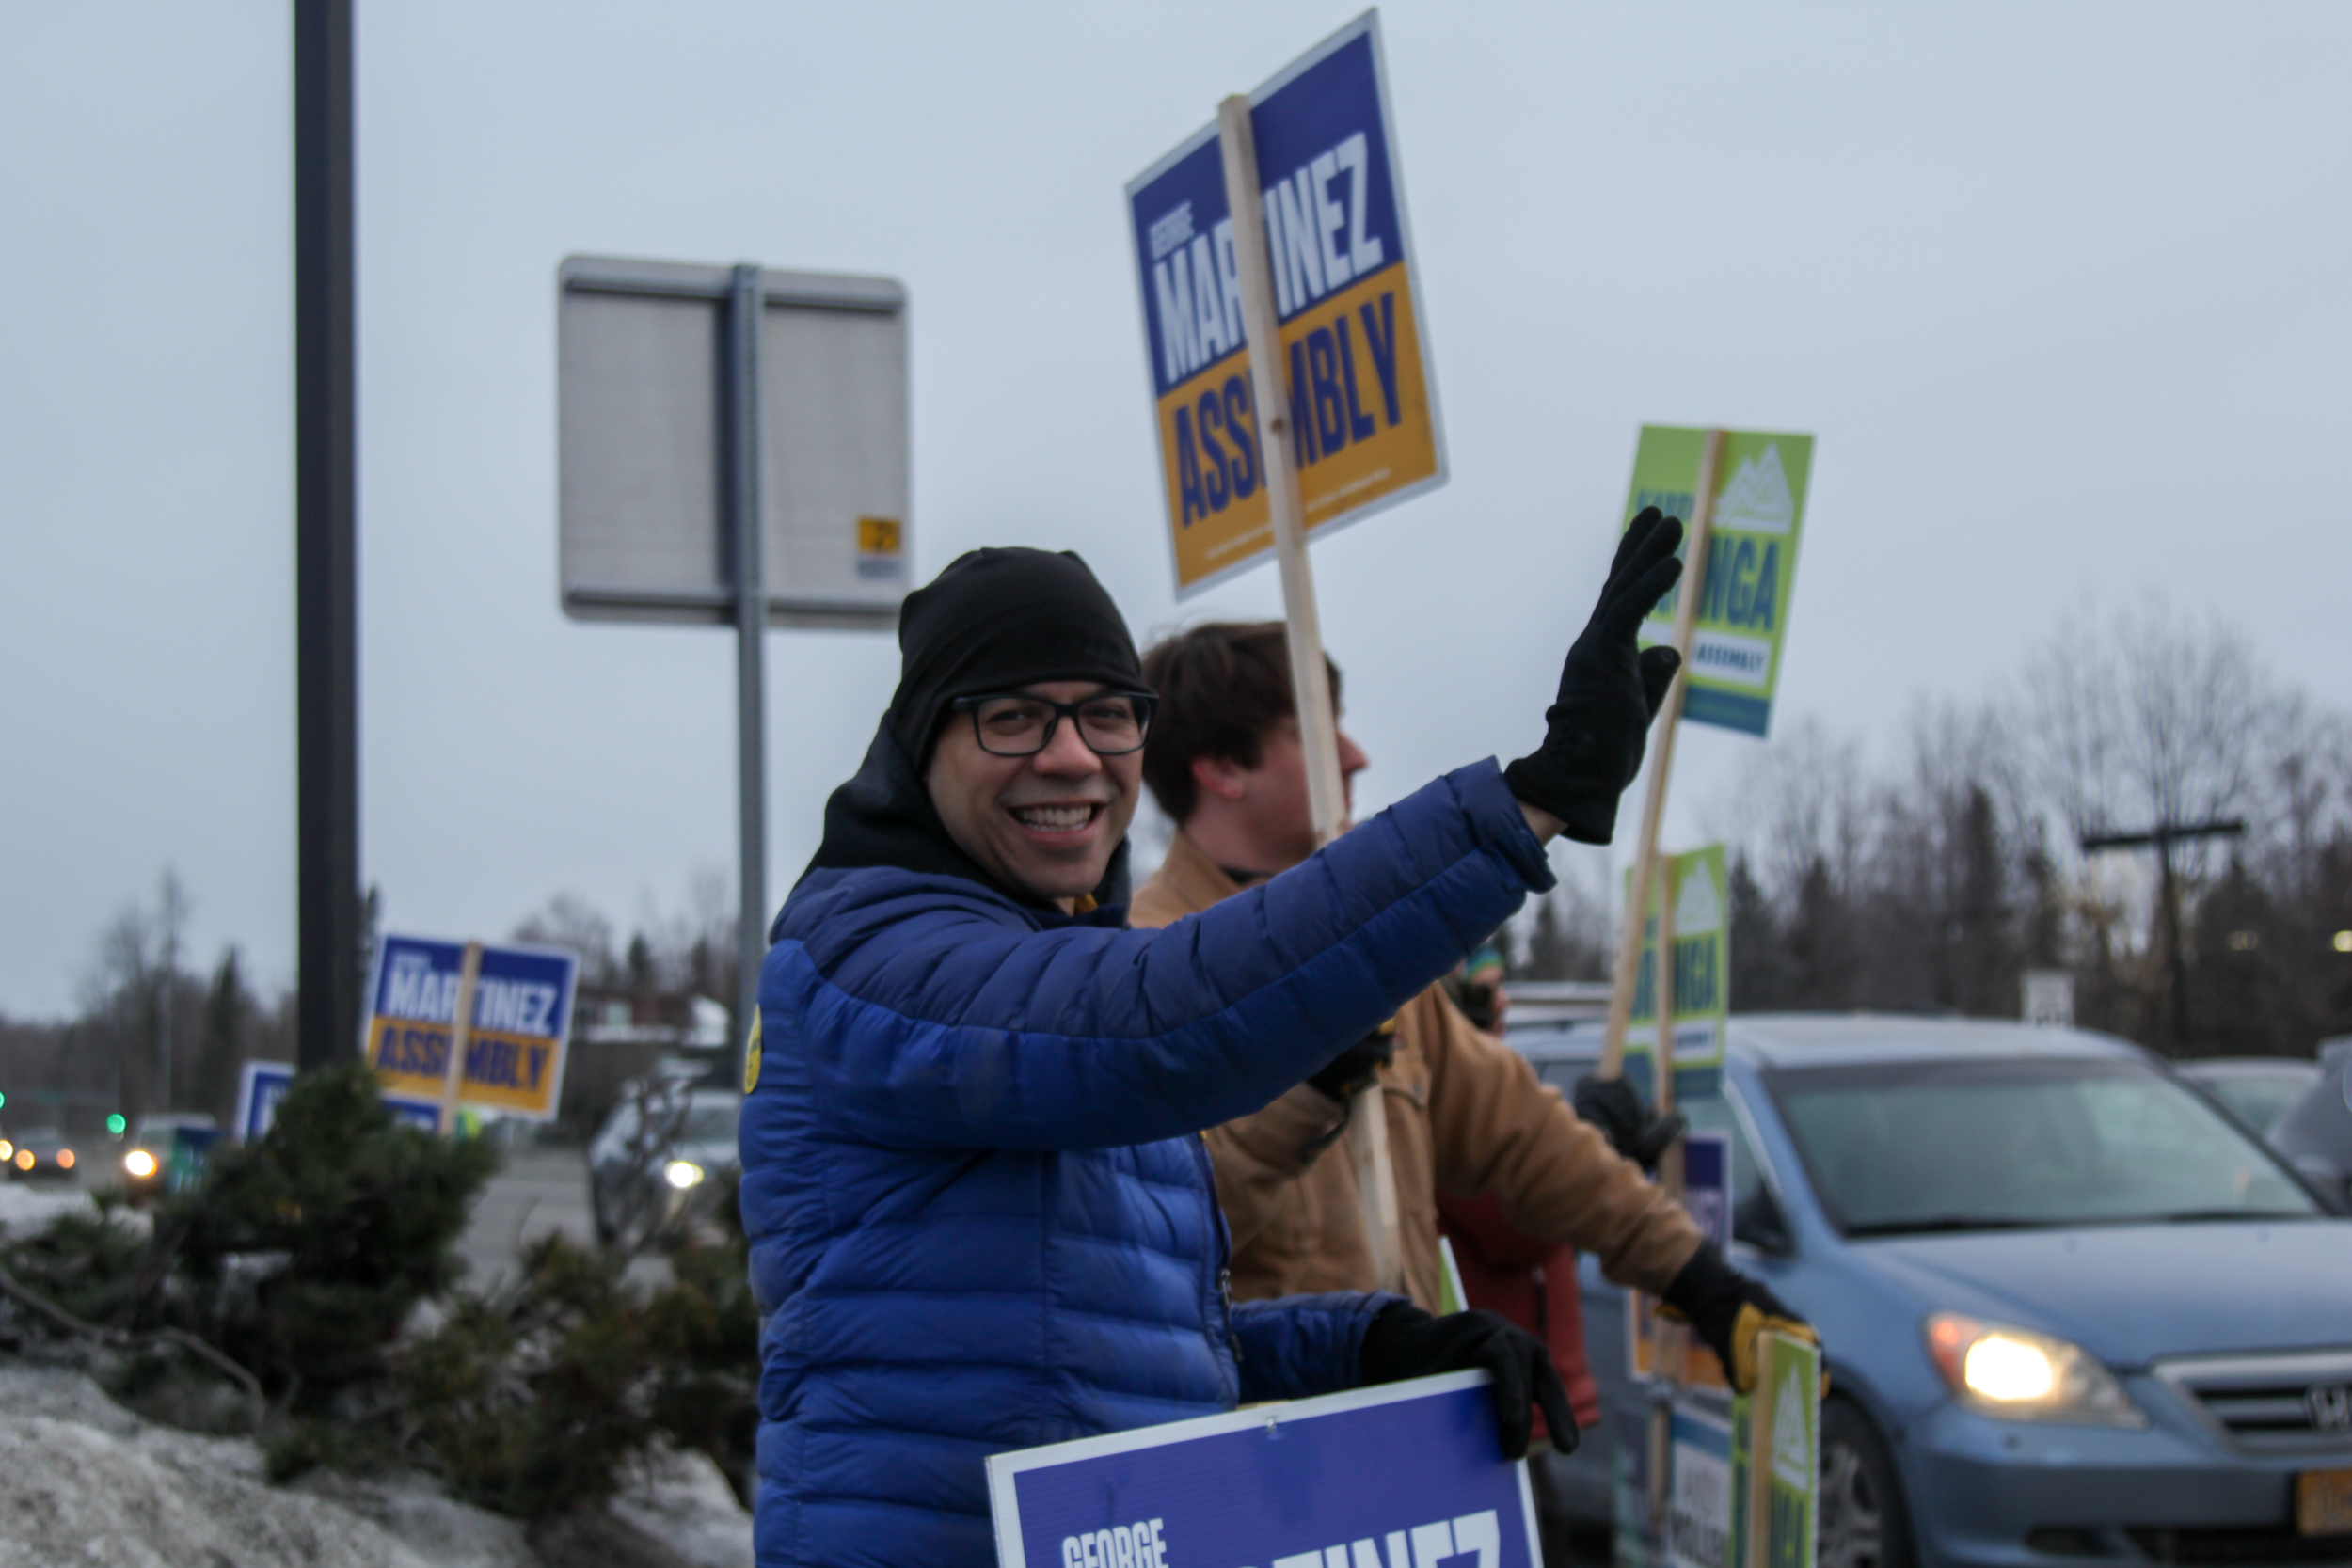 A man in a blue jacket waves to traffic while holding a political sign.